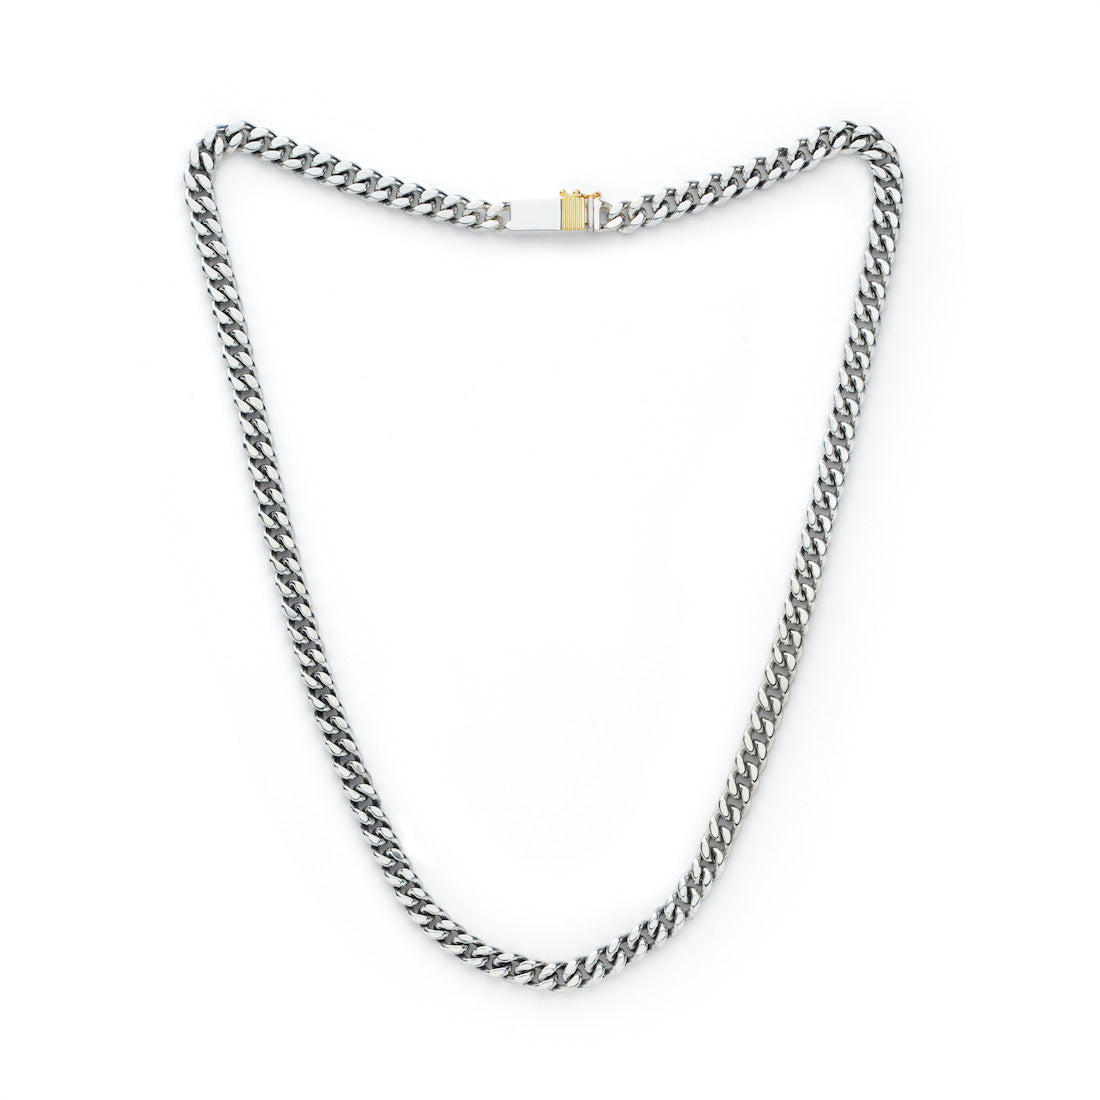 Silver　シルバー９２５　Curb Chain　カーブチェーン　Necklace　ネックレス